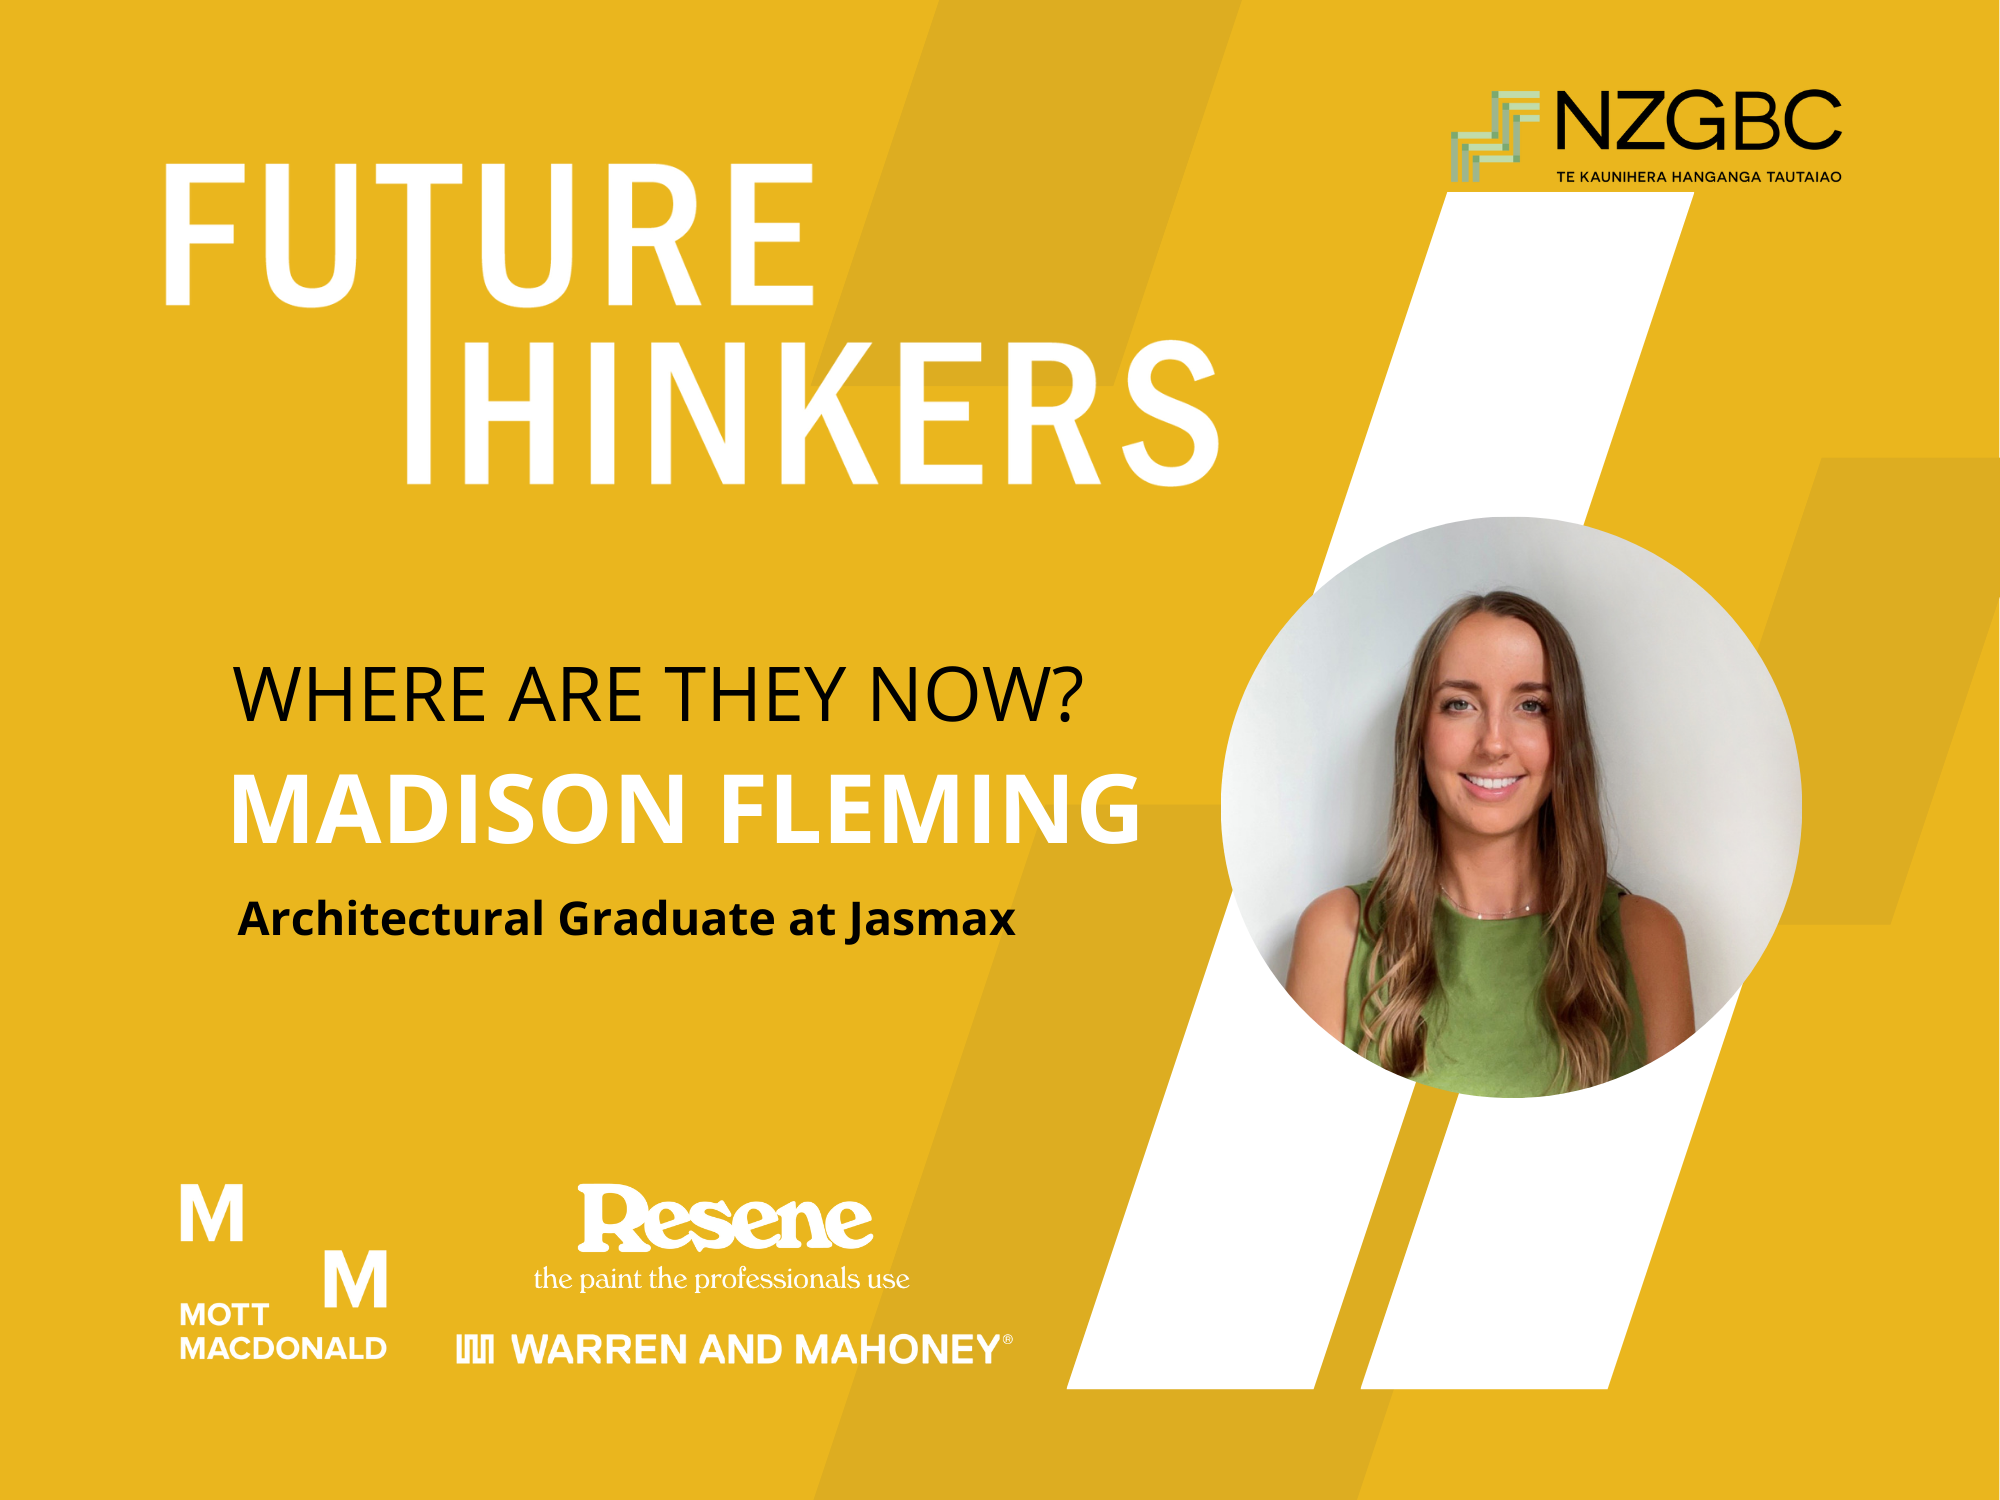 NZGBC Future Thinkers - Where Are They Now? - Madison Fleming